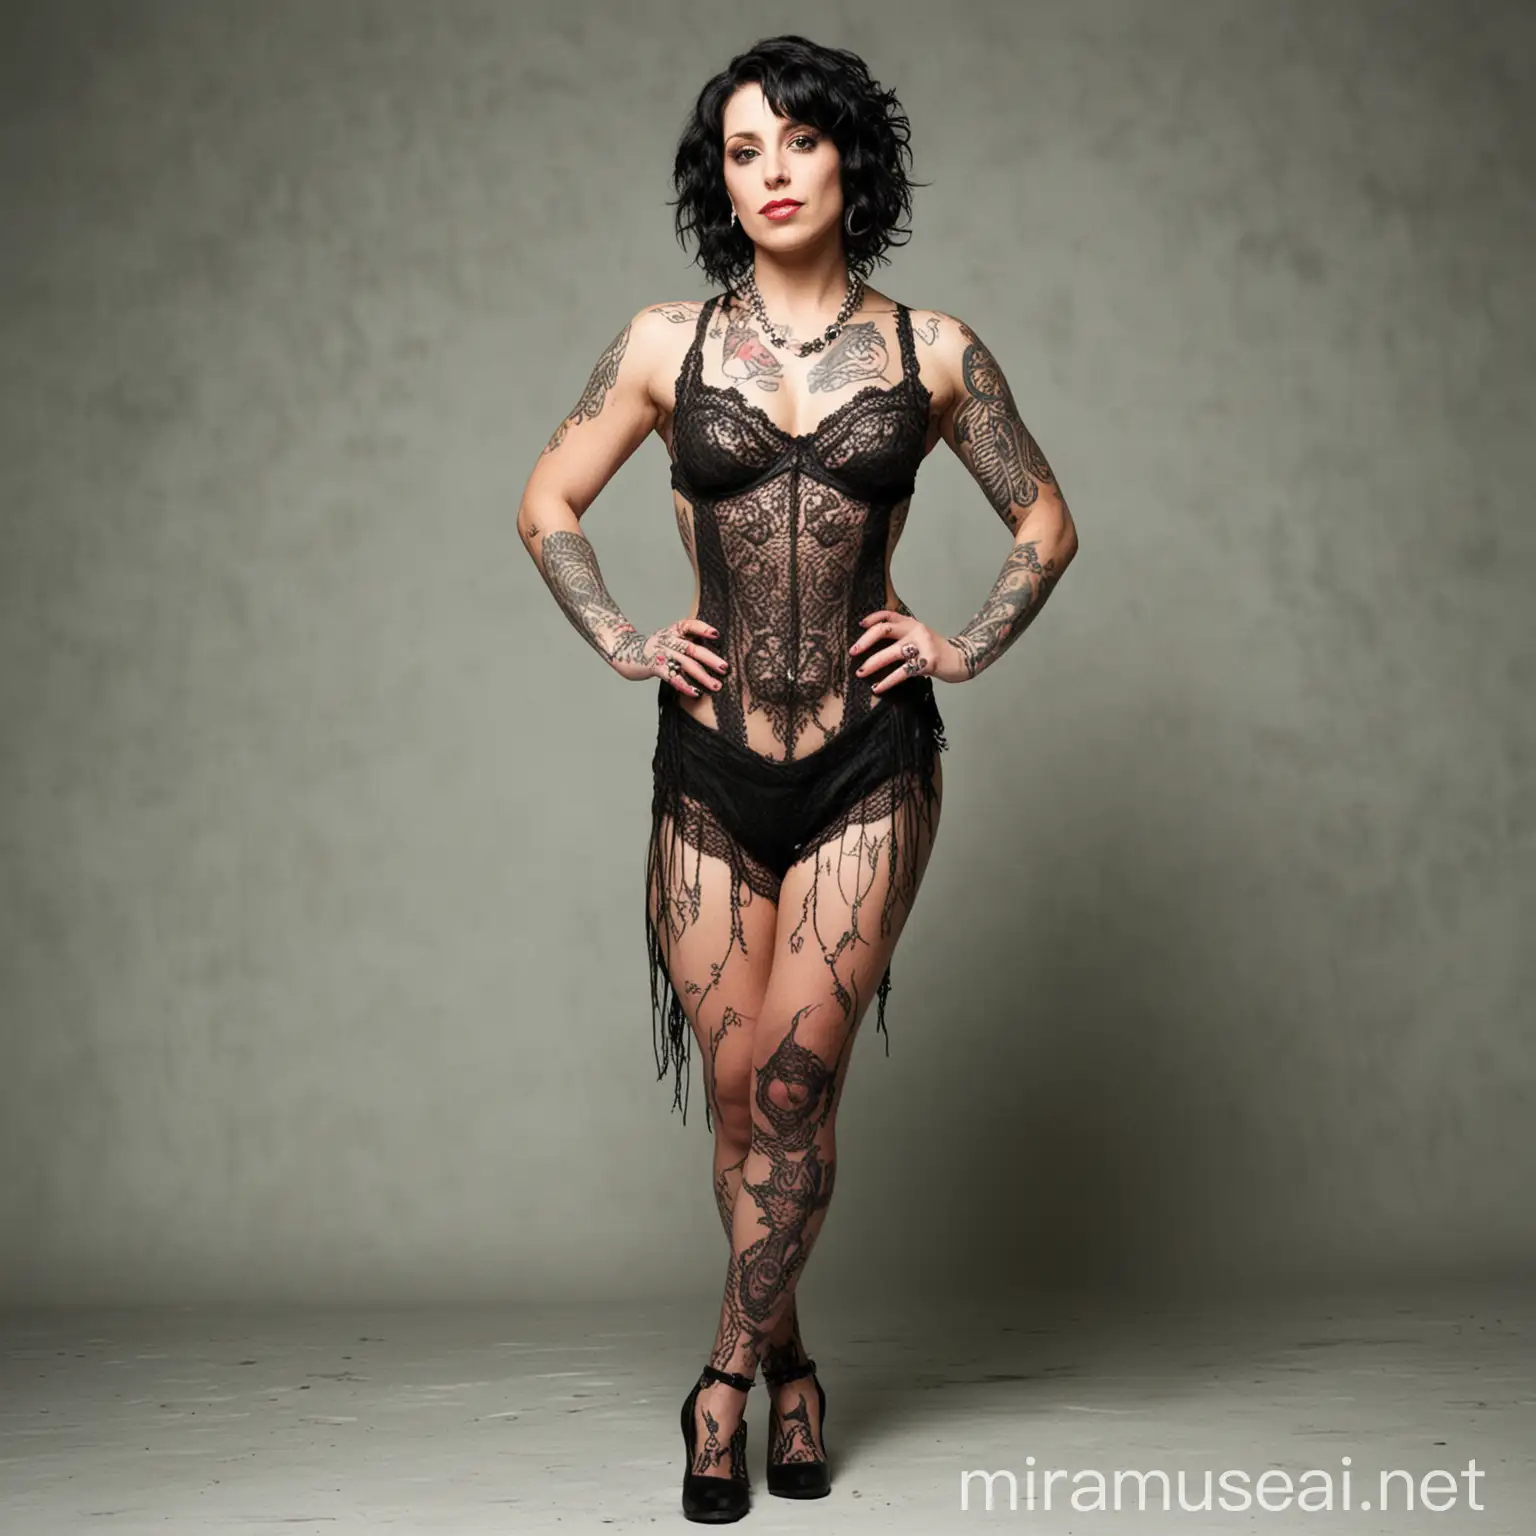 Danielle Colby-Cushman at 30 years old, full length and posing.